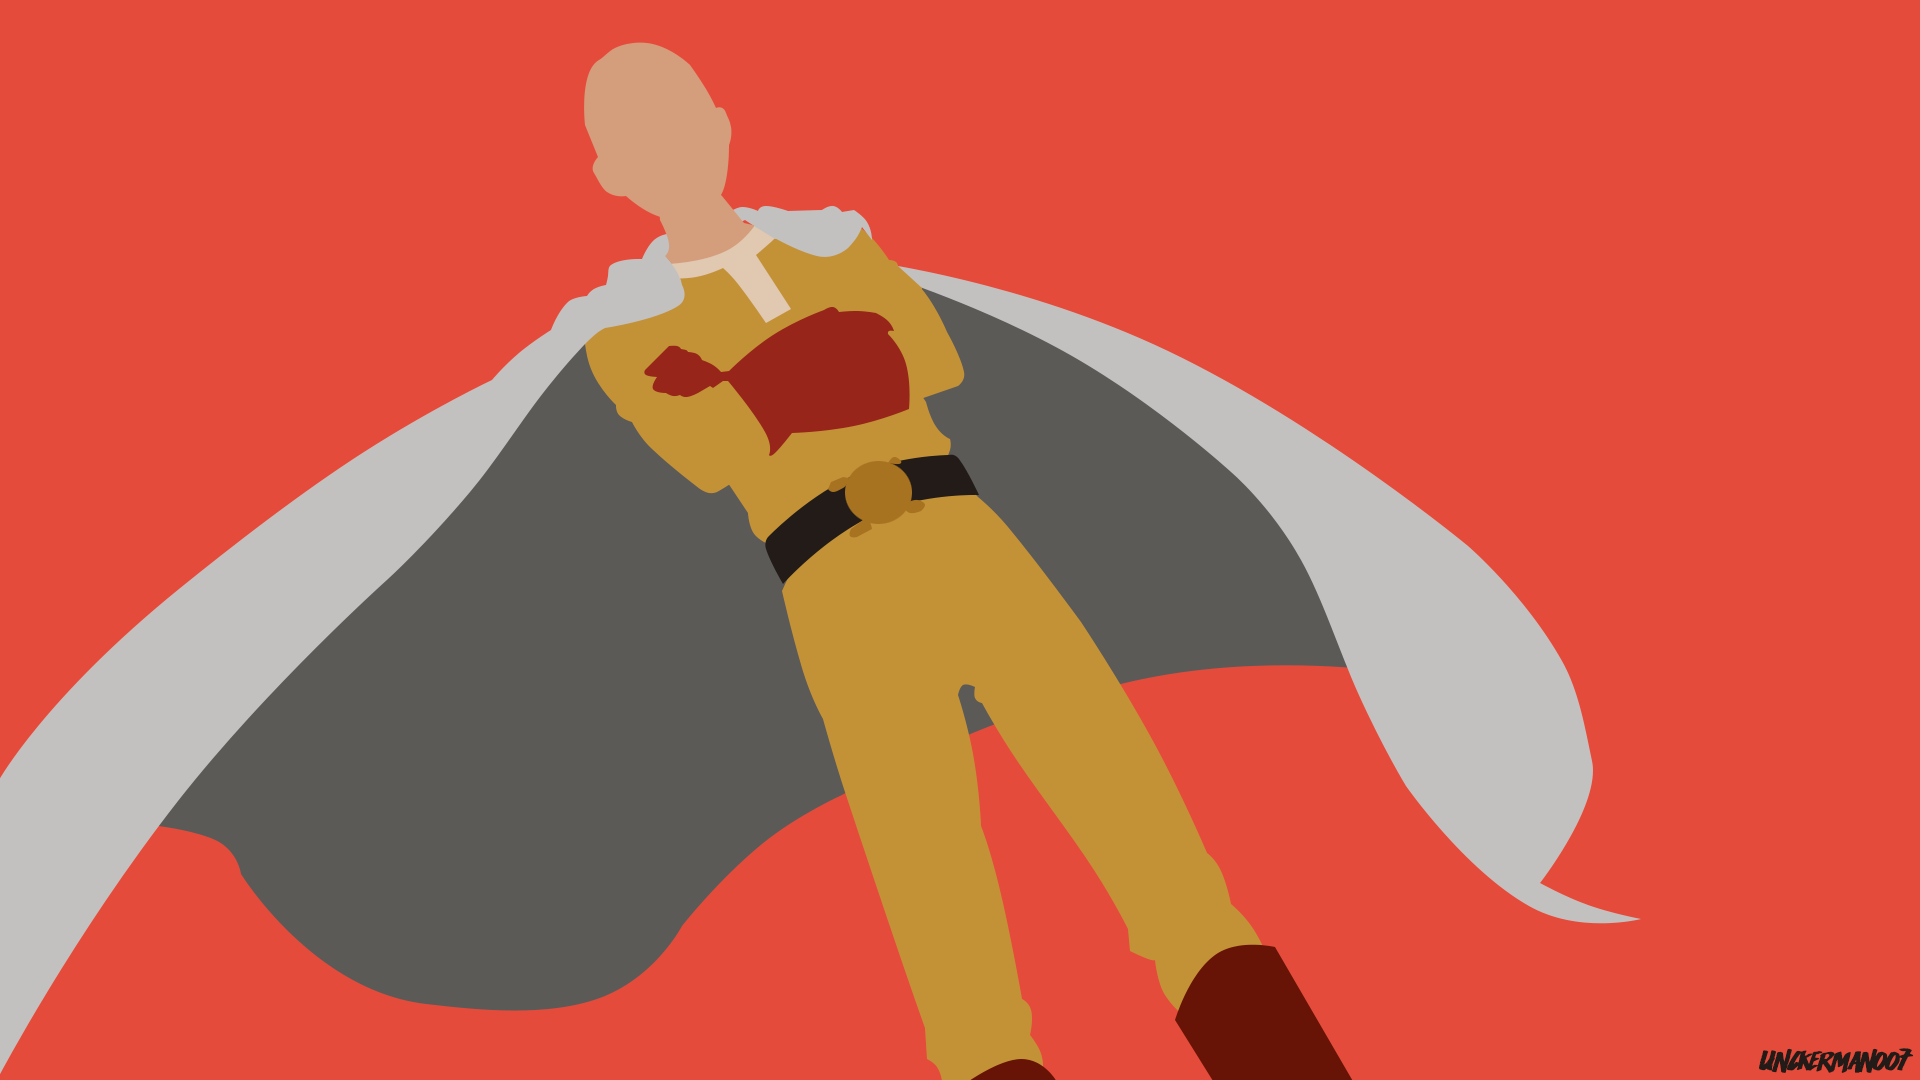 One Punch Man Minimalist Wallpapers